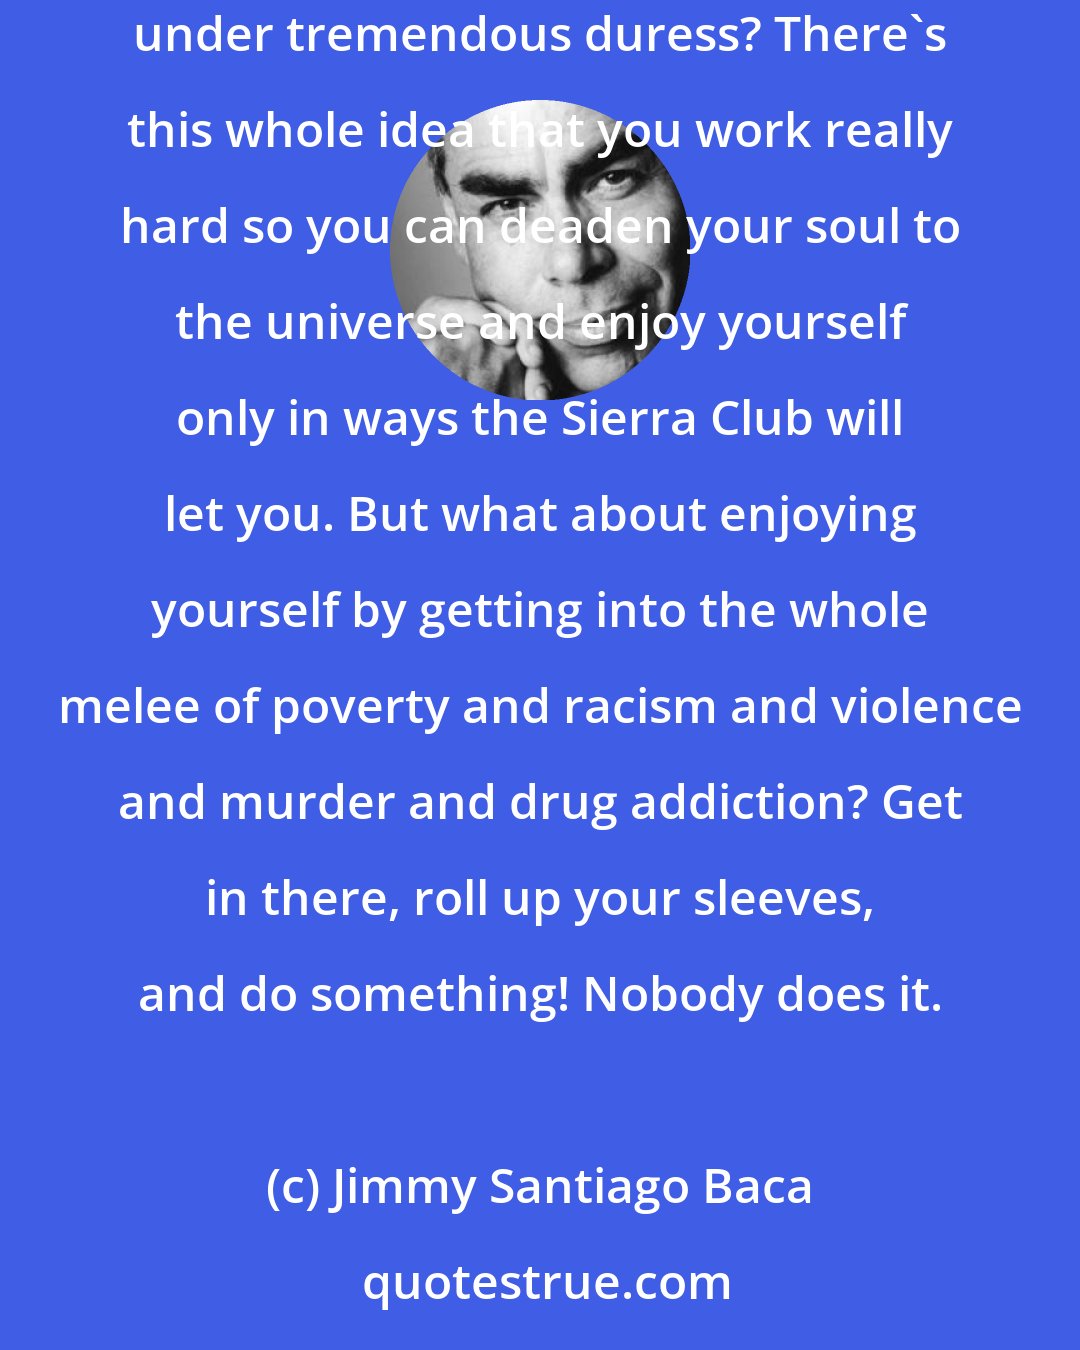 Jimmy Santiago Baca: People say what distinguishes us from the animals is that we think. Well, then why the hell don't we extend some compassion to those under tremendous duress? There's this whole idea that you work really hard so you can deaden your soul to the universe and enjoy yourself only in ways the Sierra Club will let you. But what about enjoying yourself by getting into the whole melee of poverty and racism and violence and murder and drug addiction? Get in there, roll up your sleeves, and do something! Nobody does it.